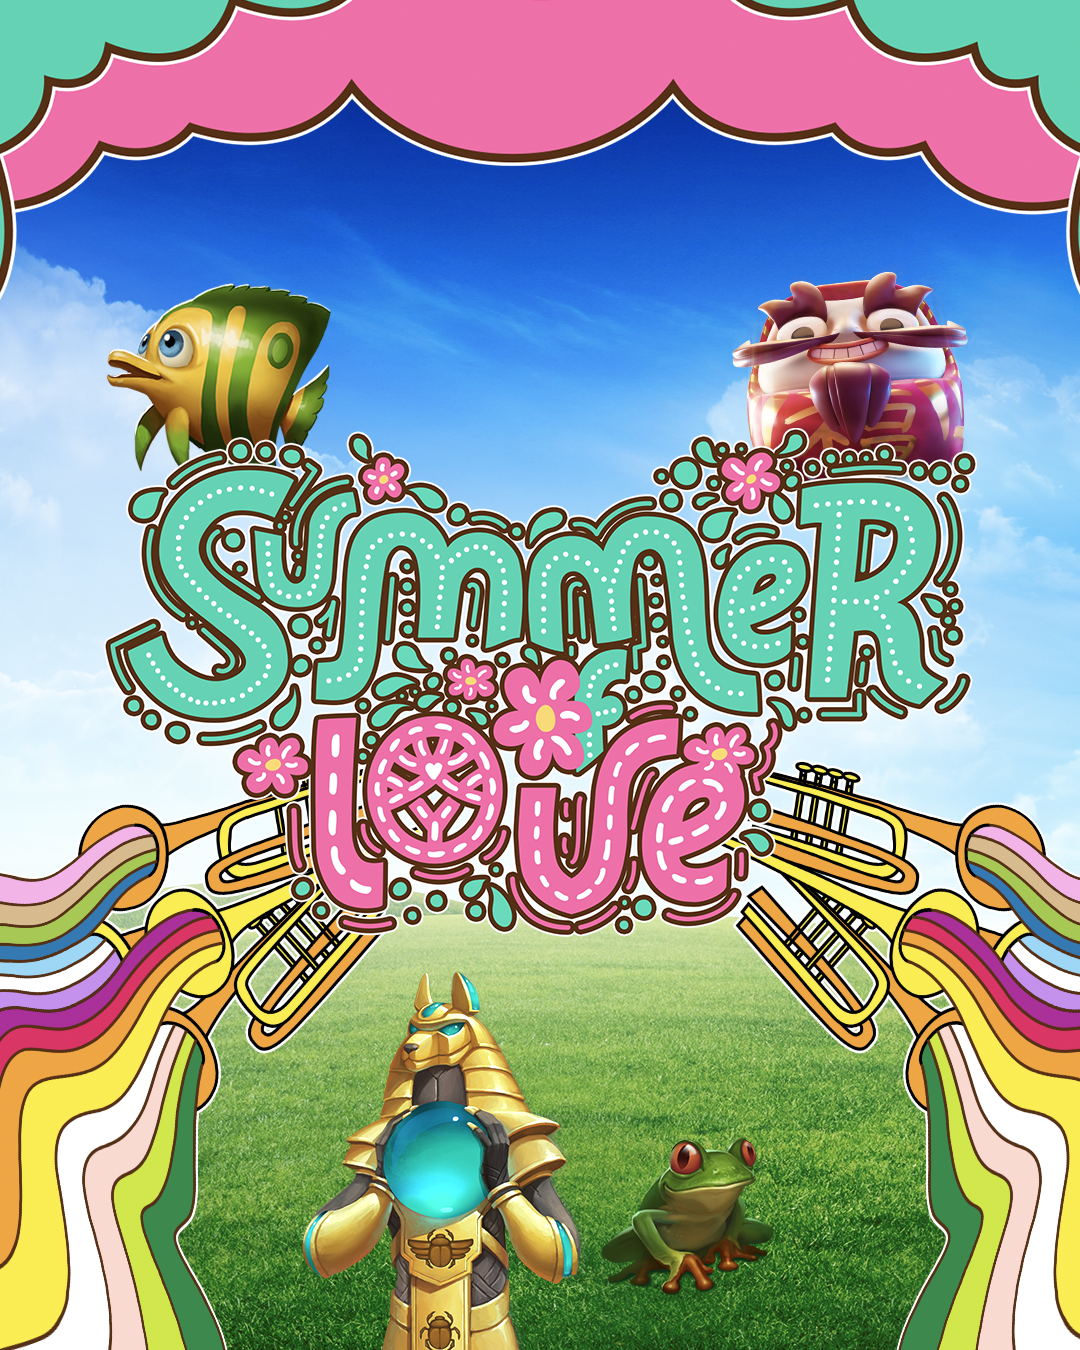 Welcome to our Summer of Love campaign!